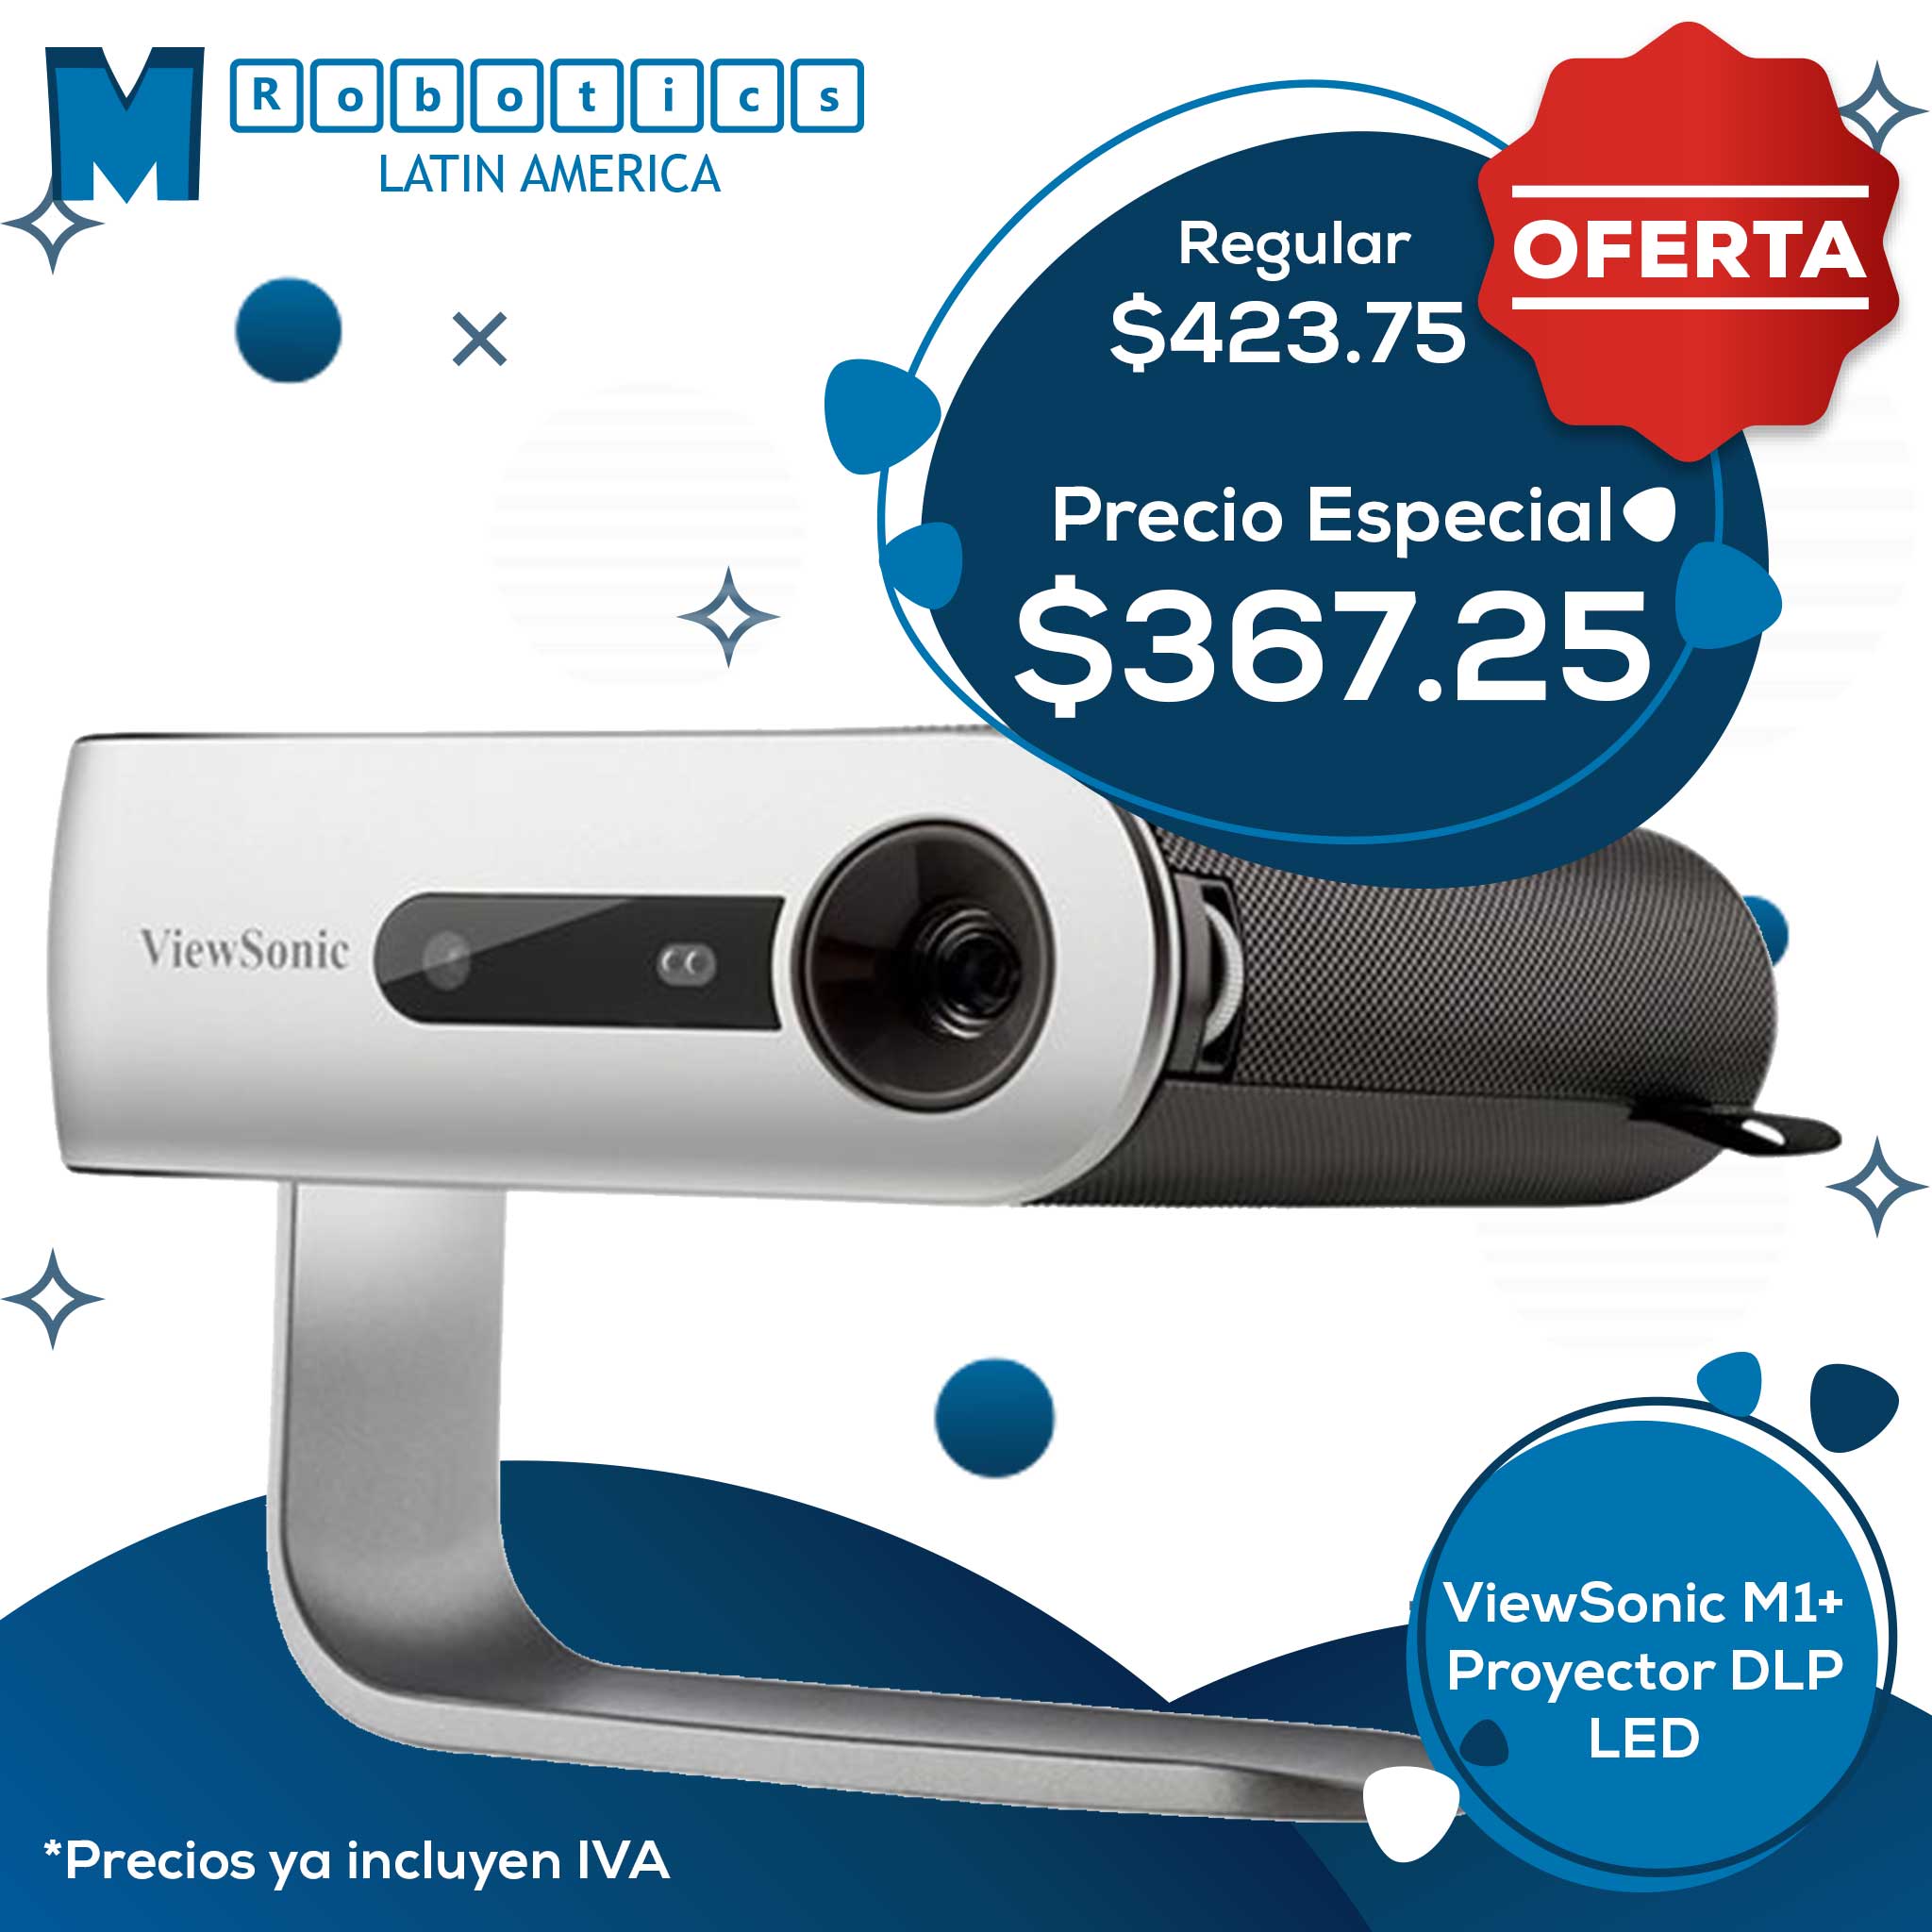 ViewSonic M1+ – Proyector DLP – LED